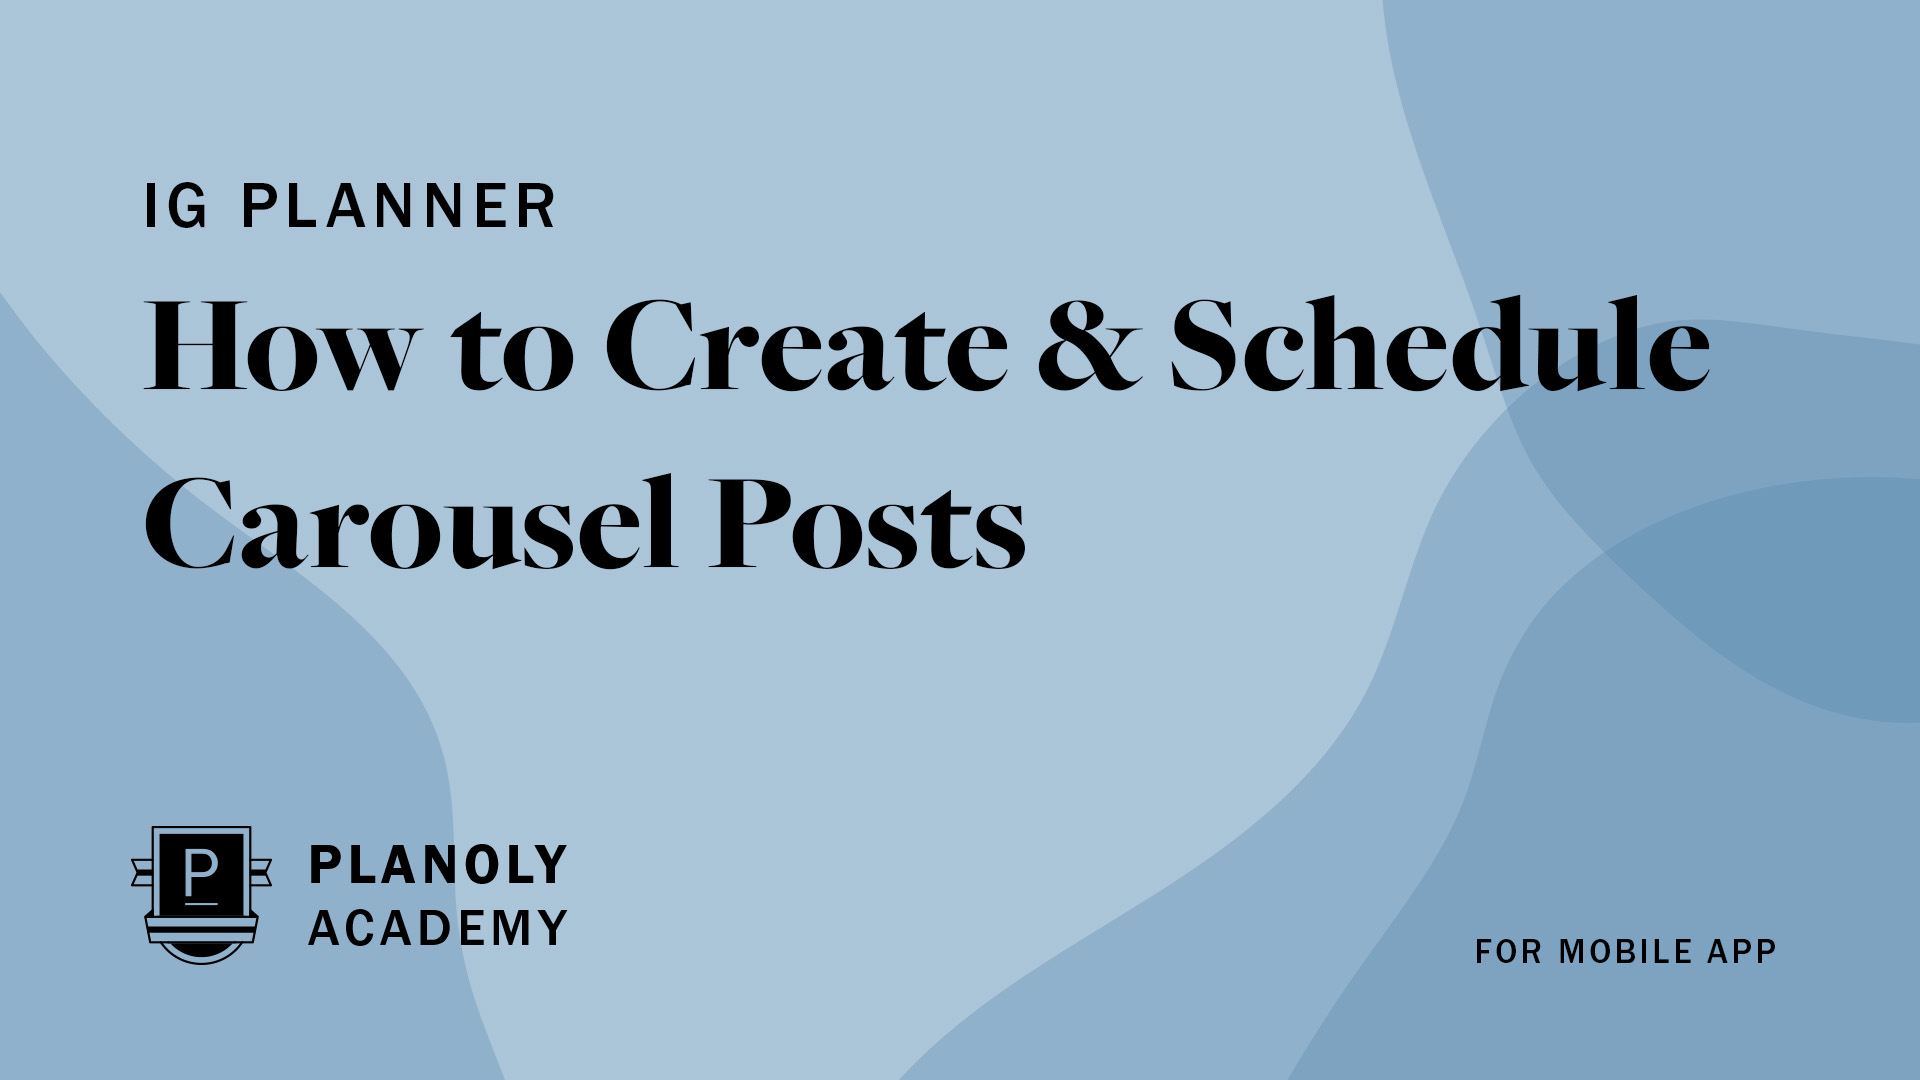 How to Create & Schedule Carousel Posts